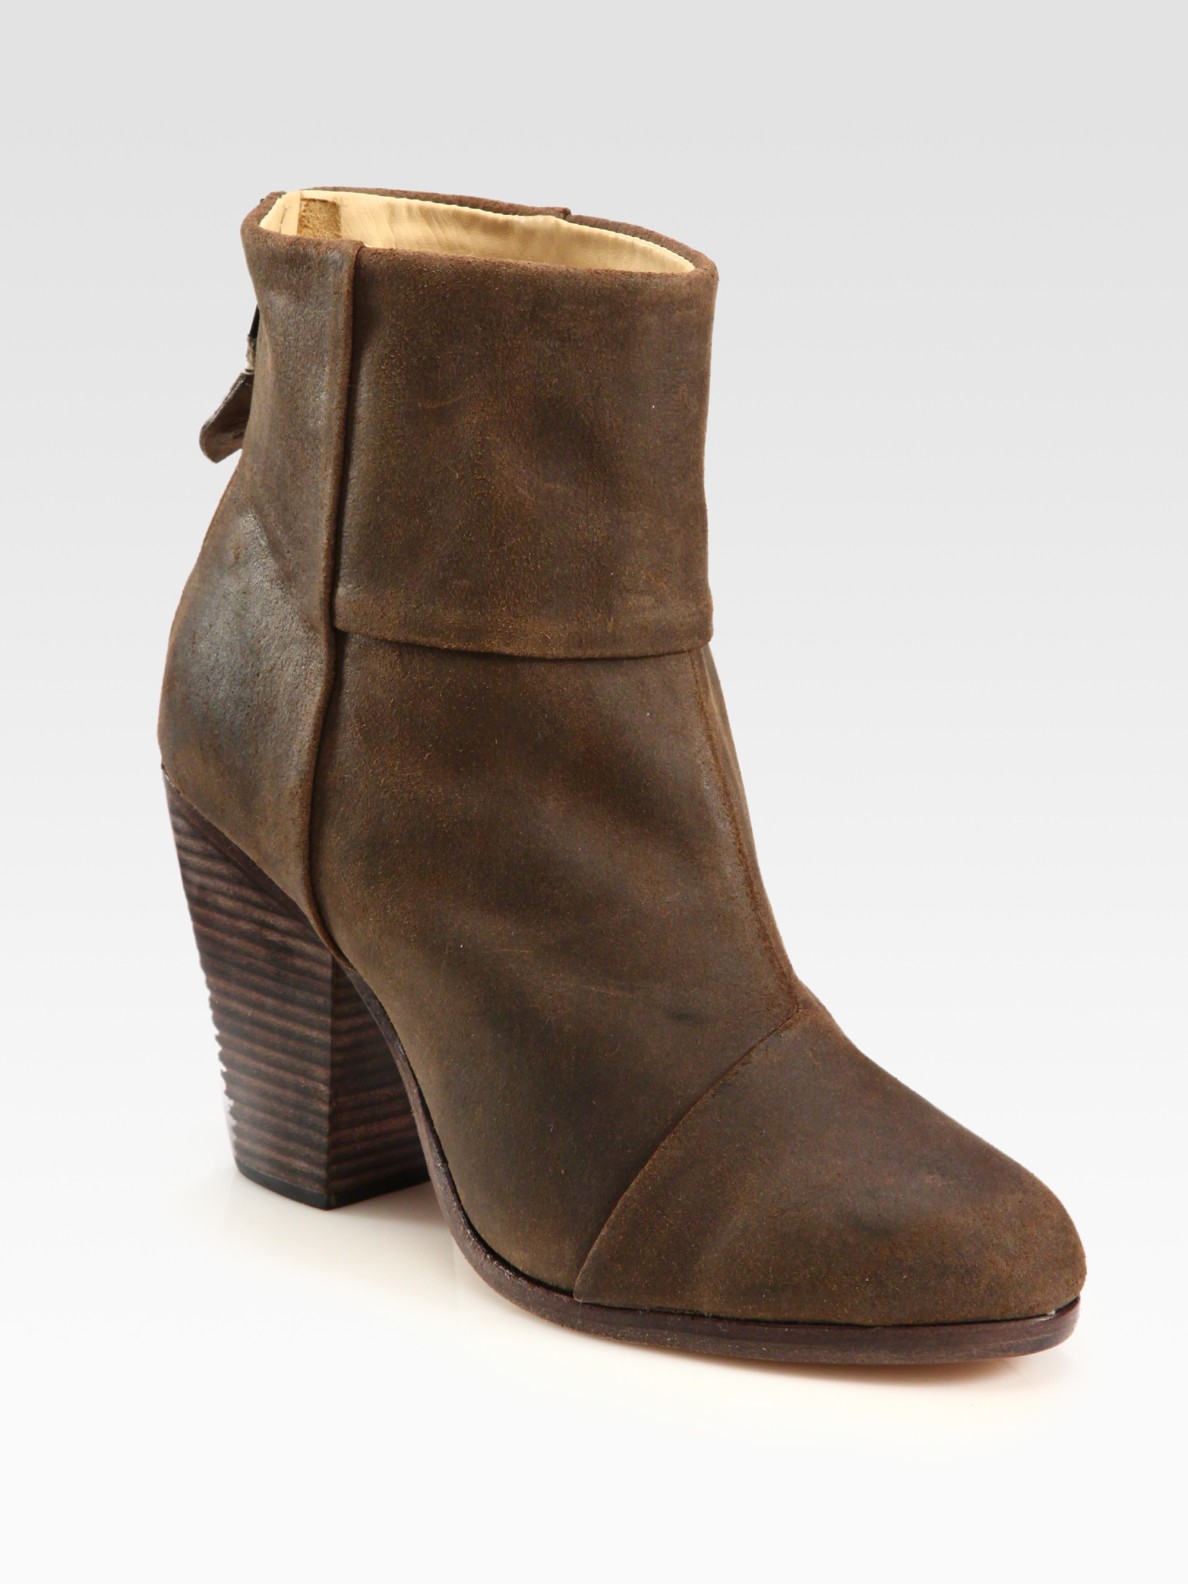 Rag & Bone Classic Newbury Suede Ankle Boots in Brown | Lyst